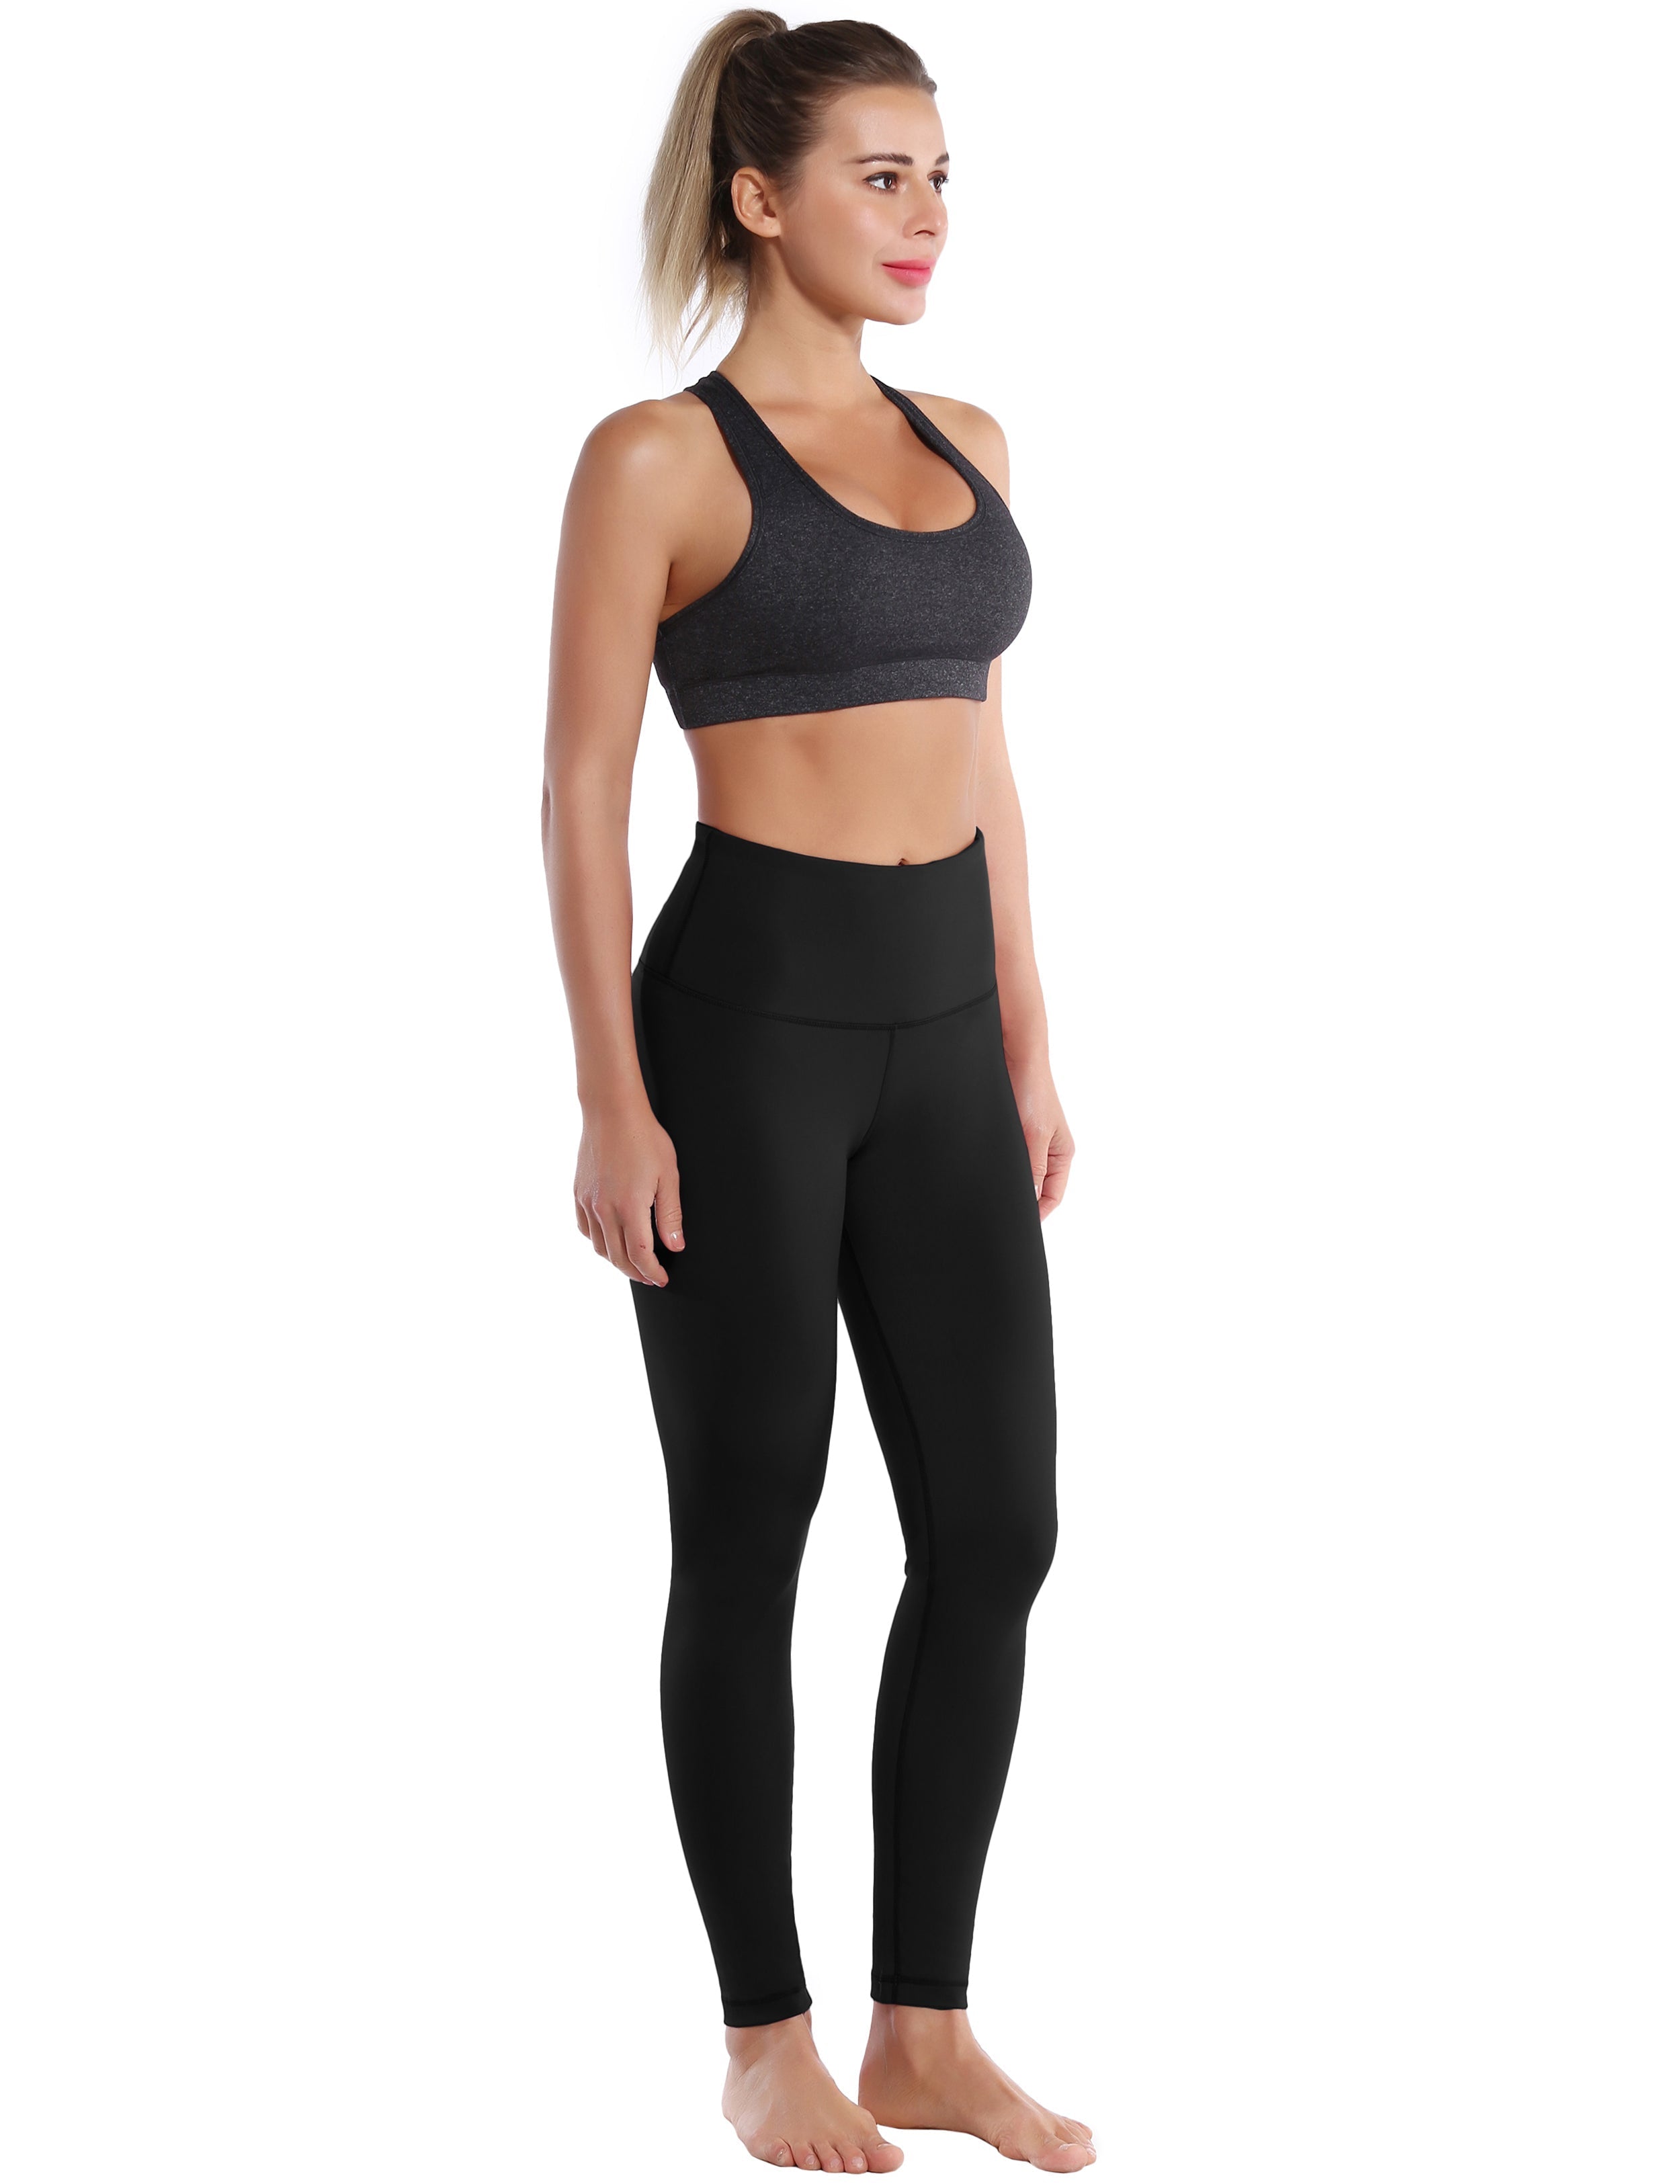 High Waist yogastudio Pants black 75%Nylon/25%Spandex Fabric doesn't attract lint easily 4-way stretch No see-through Moisture-wicking Tummy control Inner pocket Four lengths